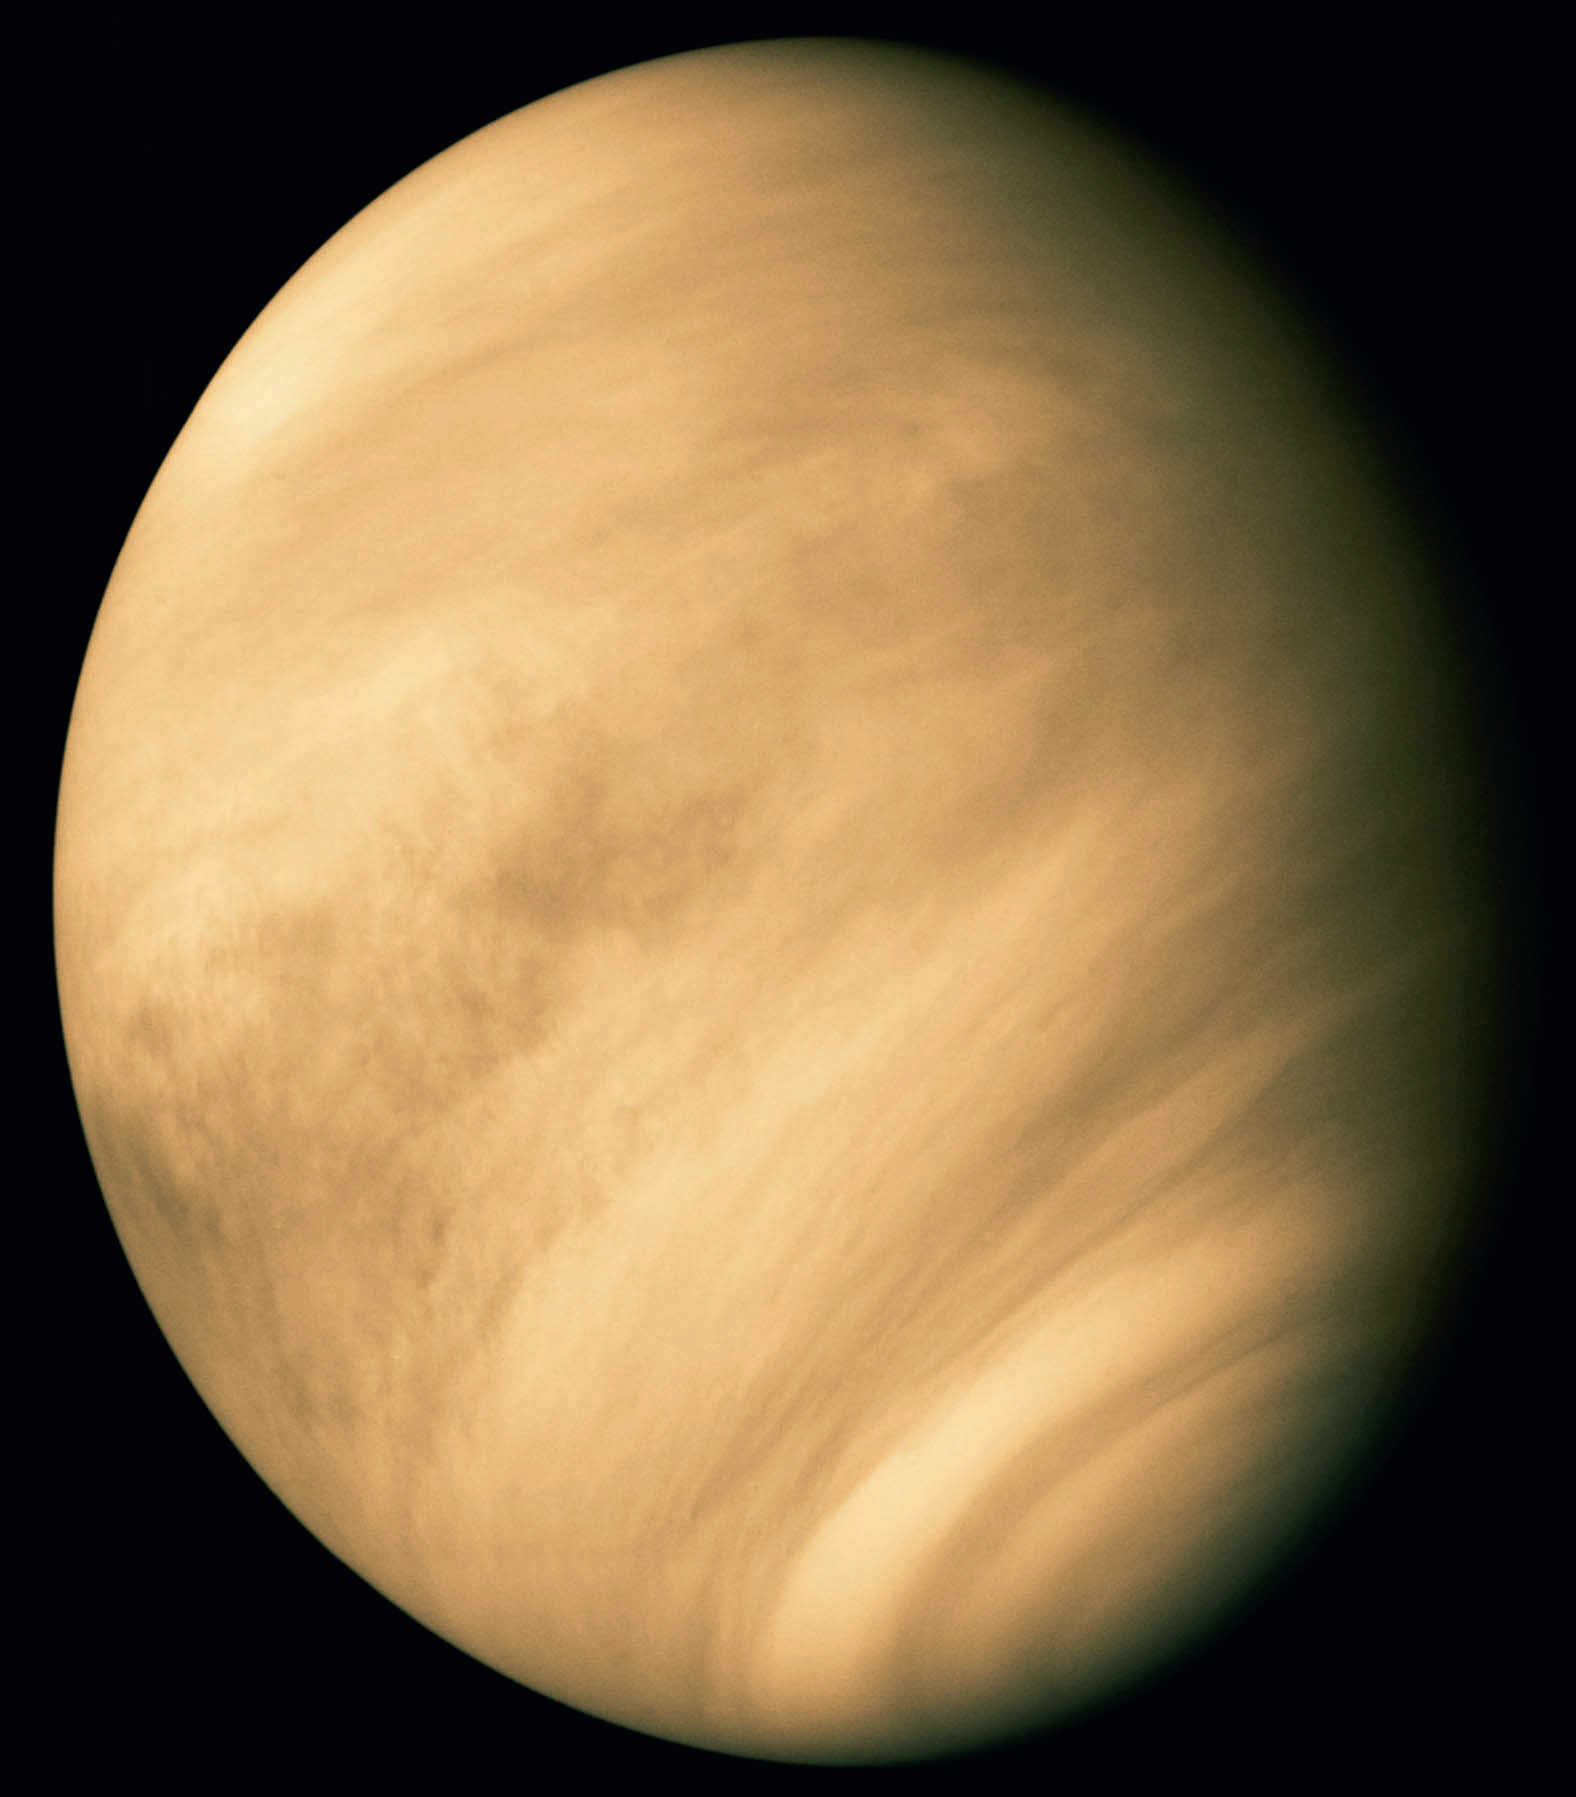 Venus as seen by the American space probe Mariner 10 in February 1974. The cloud structures are not visible in this detail from Earth. Calvin J. Hamilton